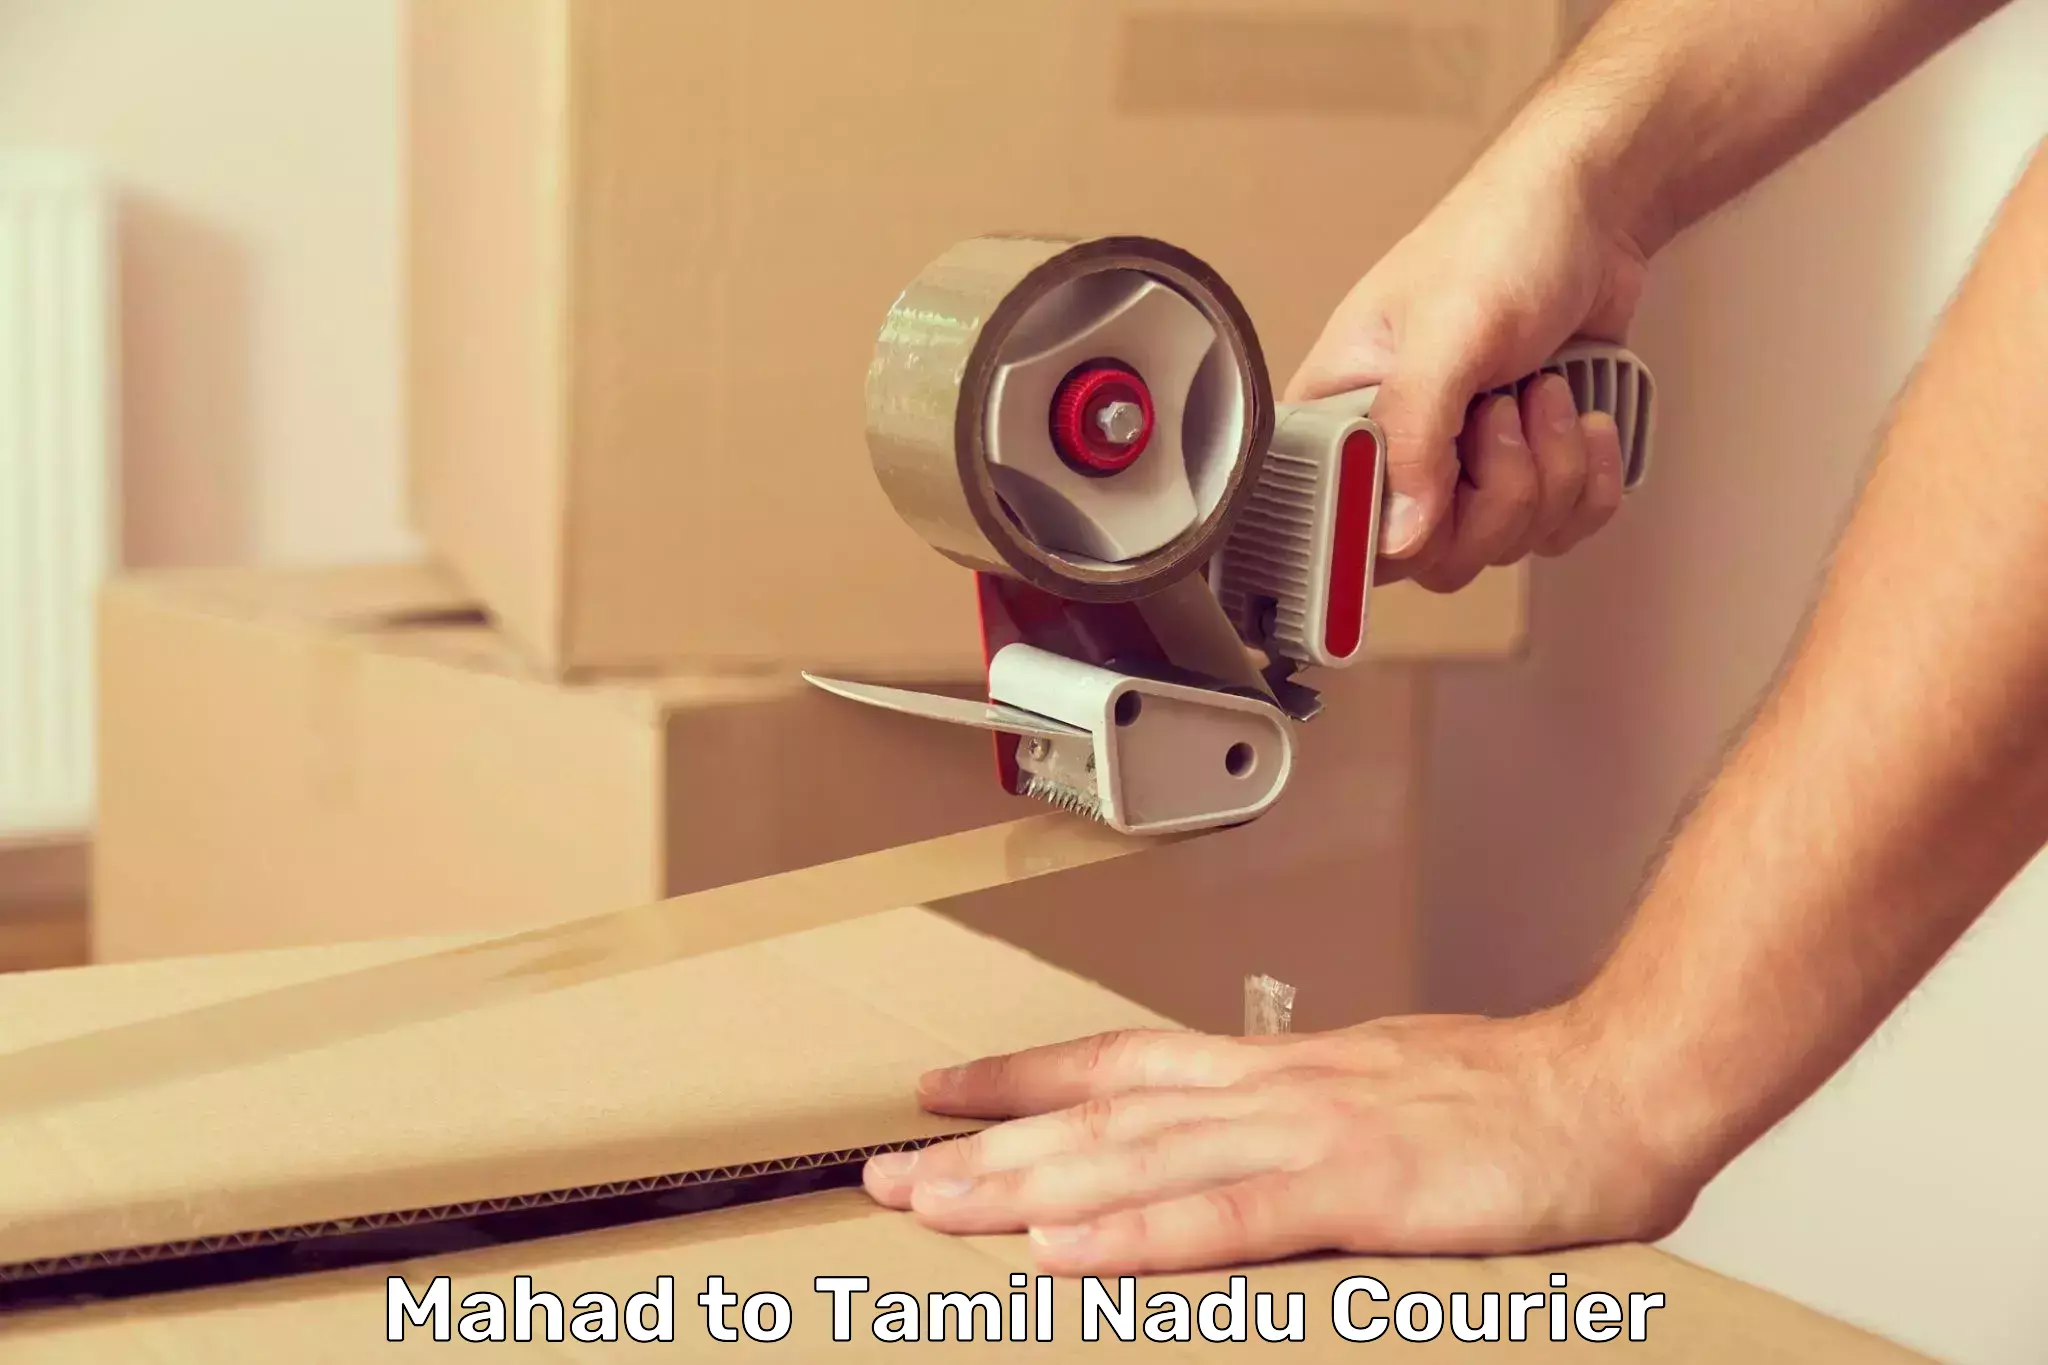 International courier networks Mahad to Memalur